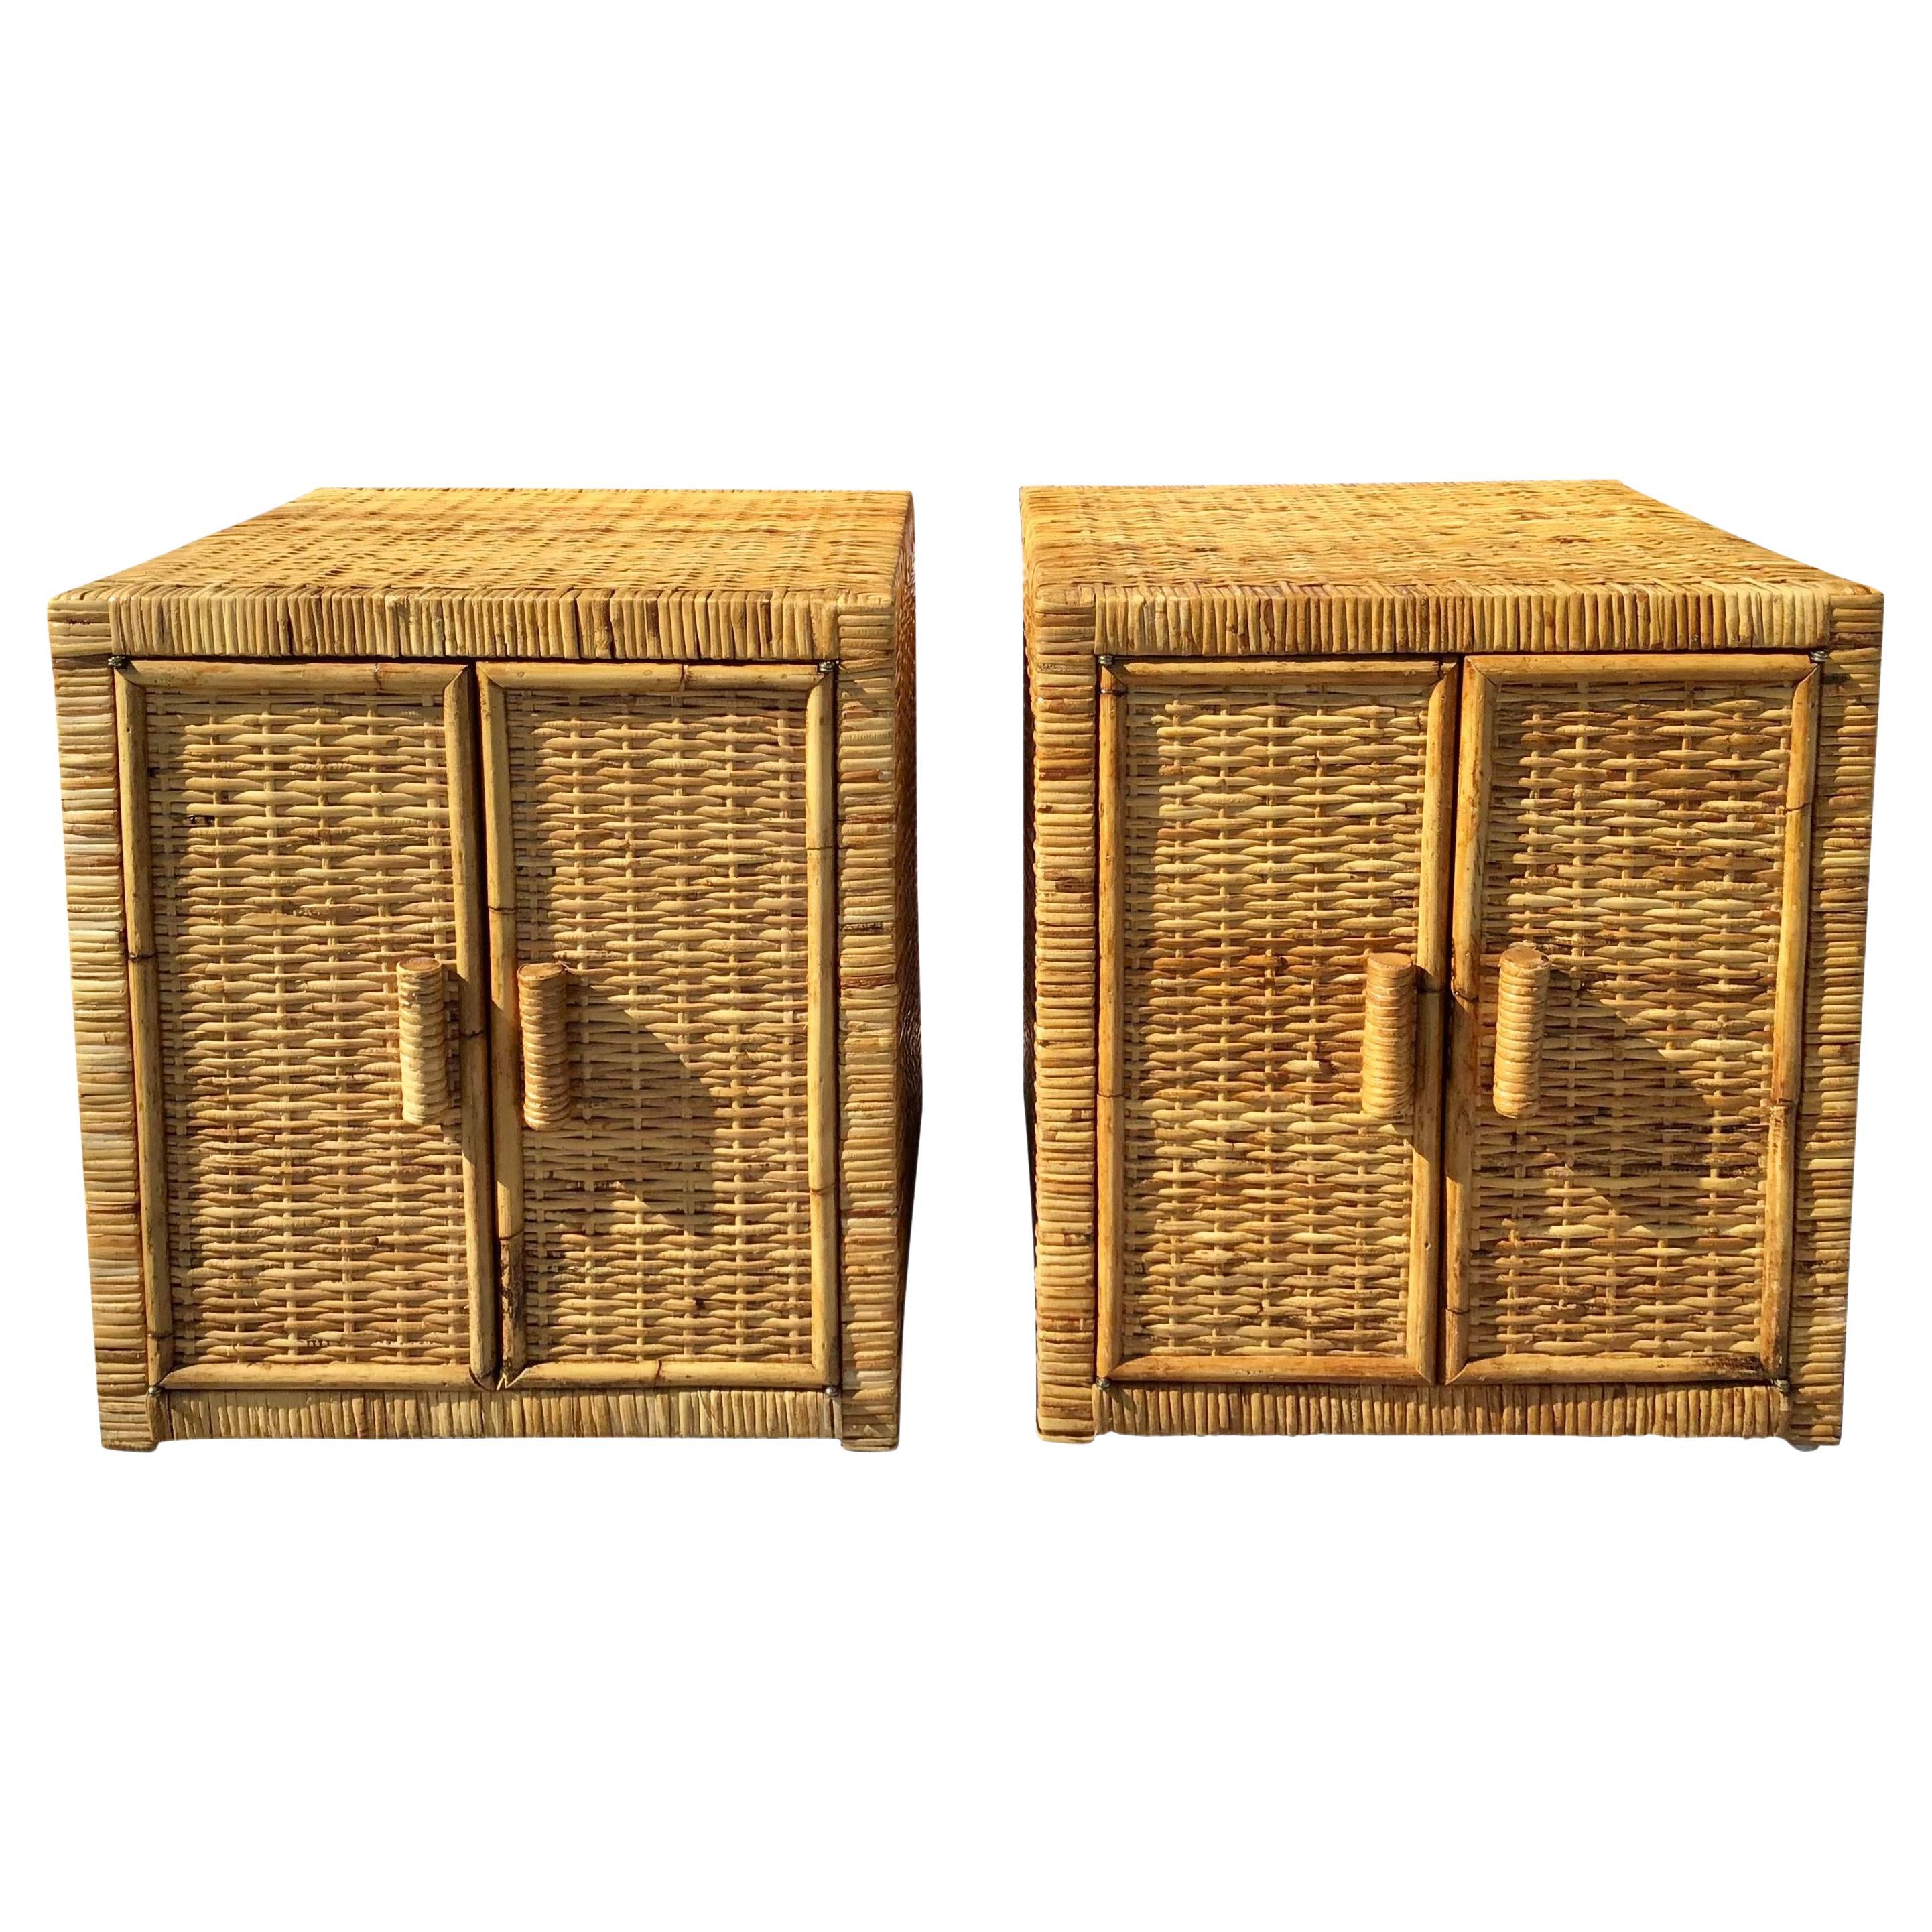 Bielecky Brothers Rattan Two Door Cabinets, a Pair